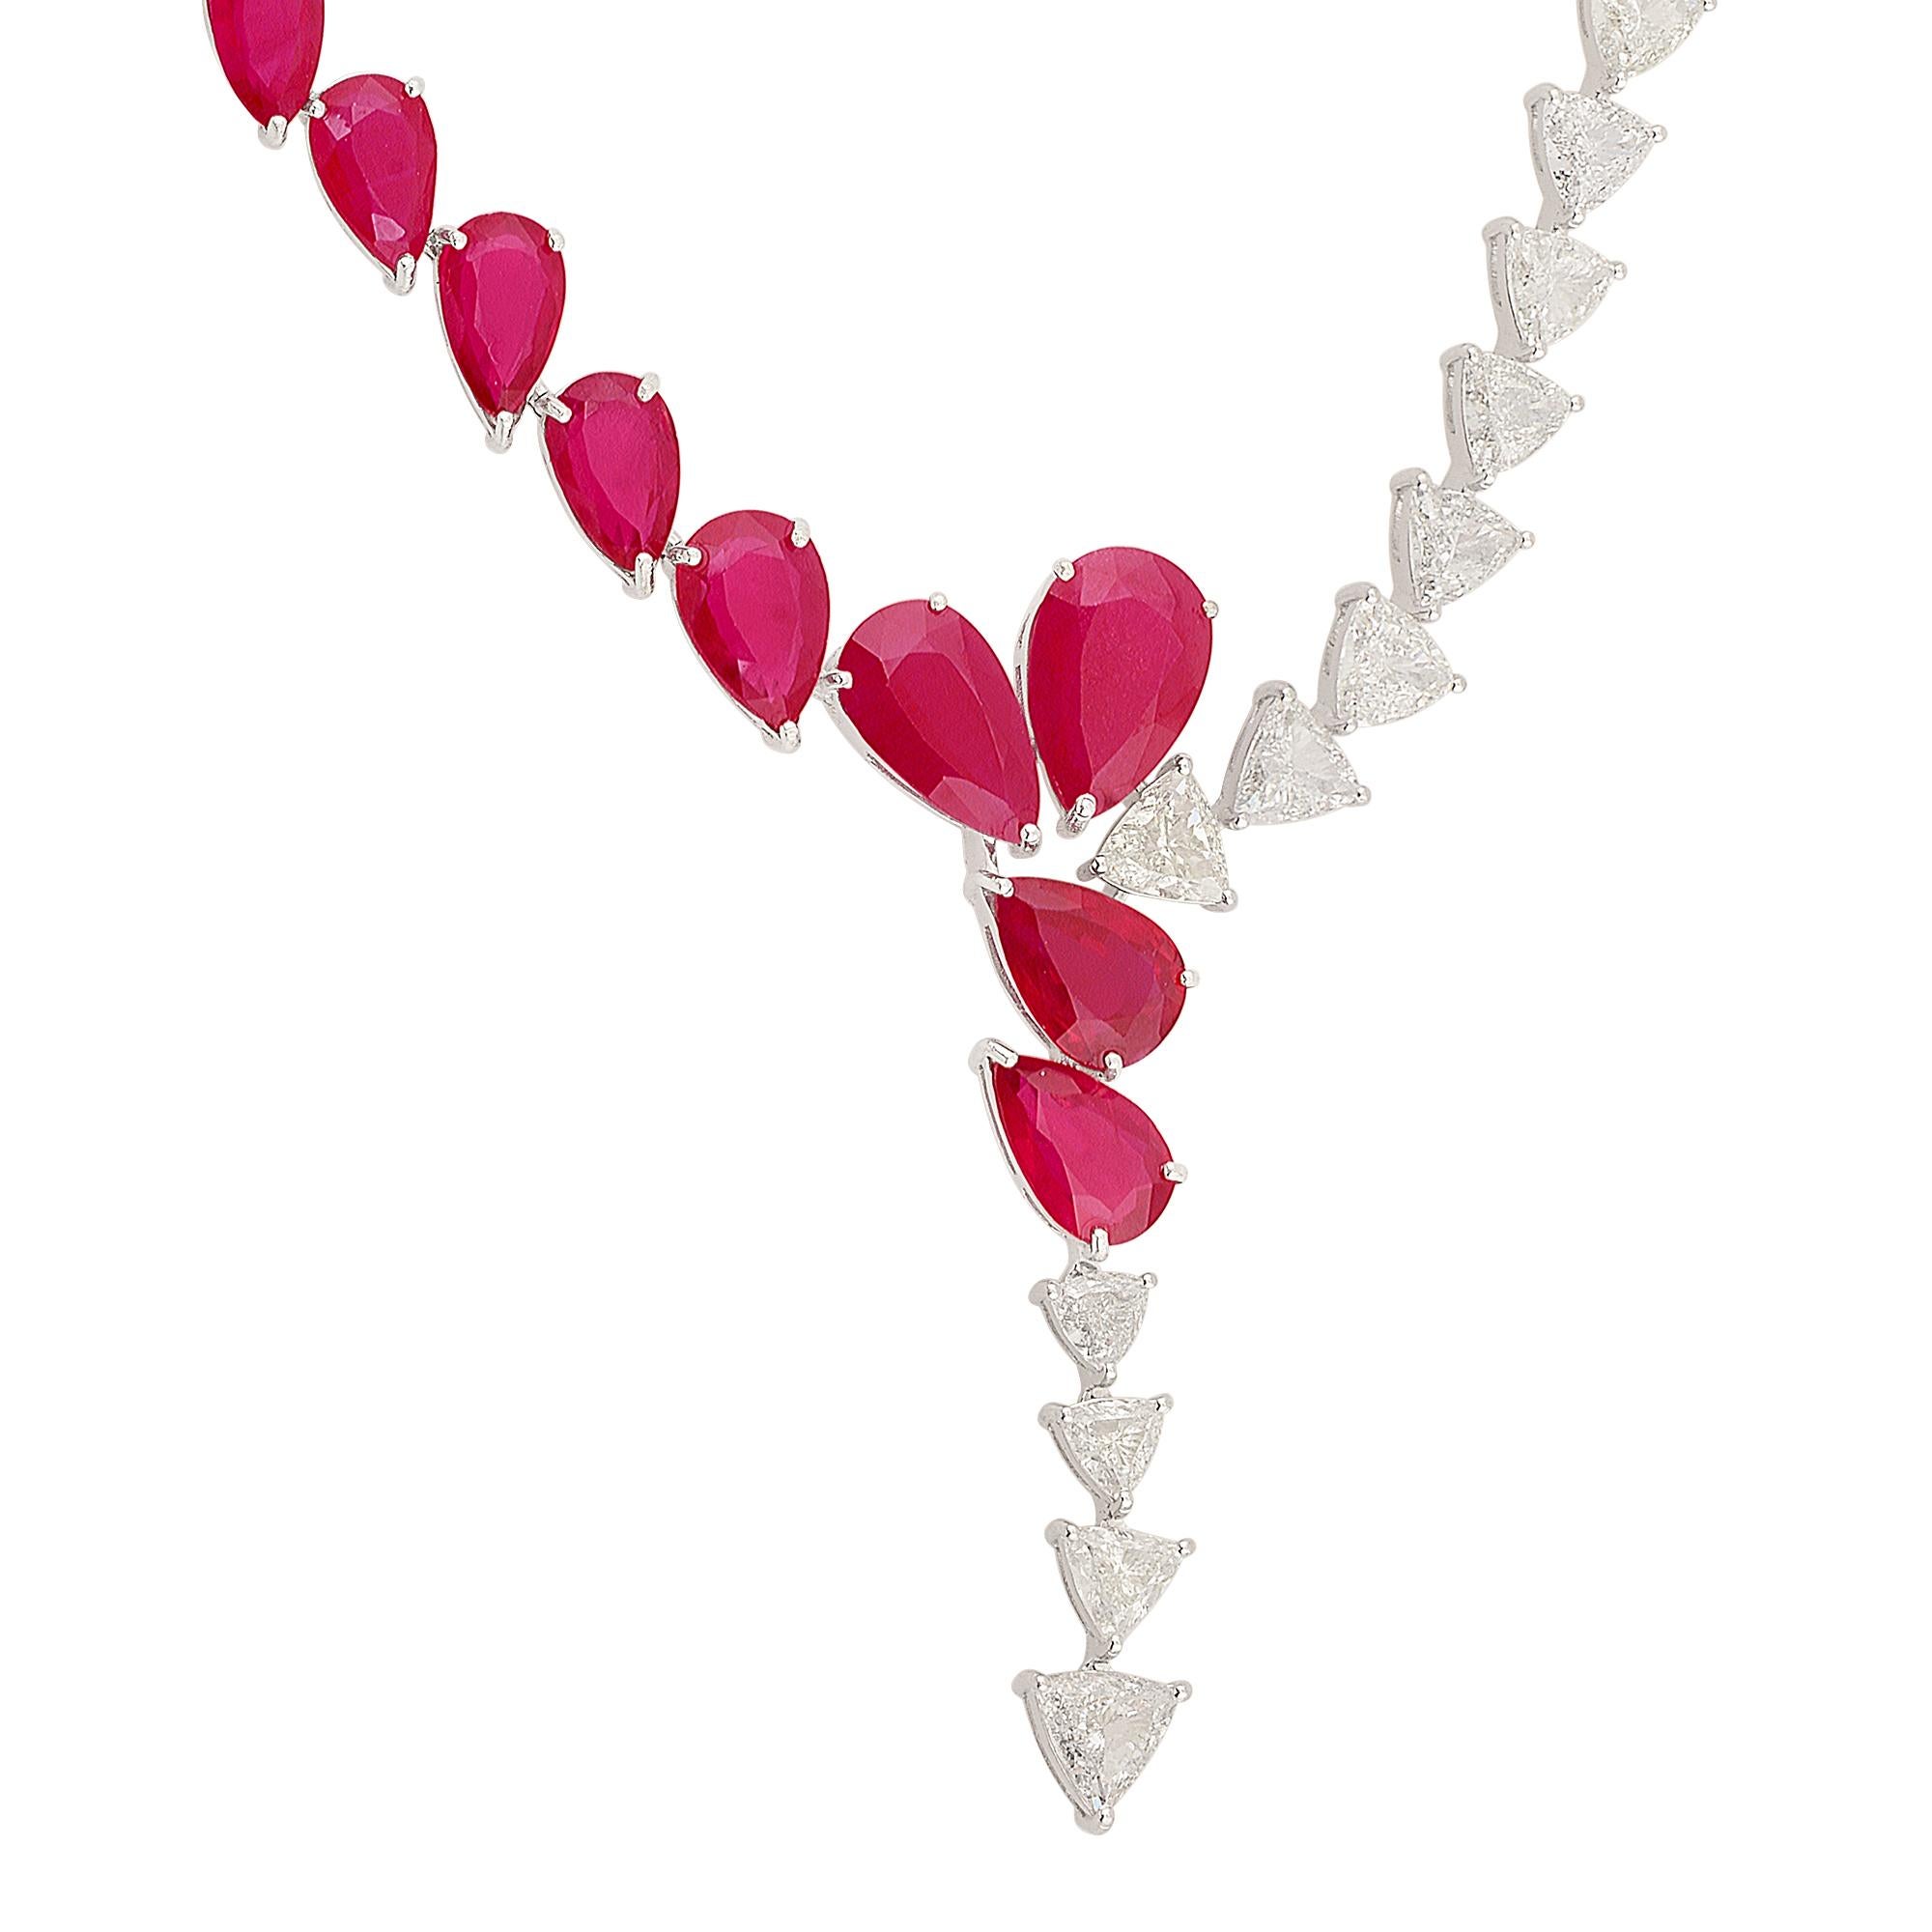 The focal point of this necklace is the pear-shaped ruby processed gemstone. With its captivating red hue, the ruby exudes elegance and sophistication. The processed gemstone undergoes expert treatment to enhance its color and clarity, resulting in